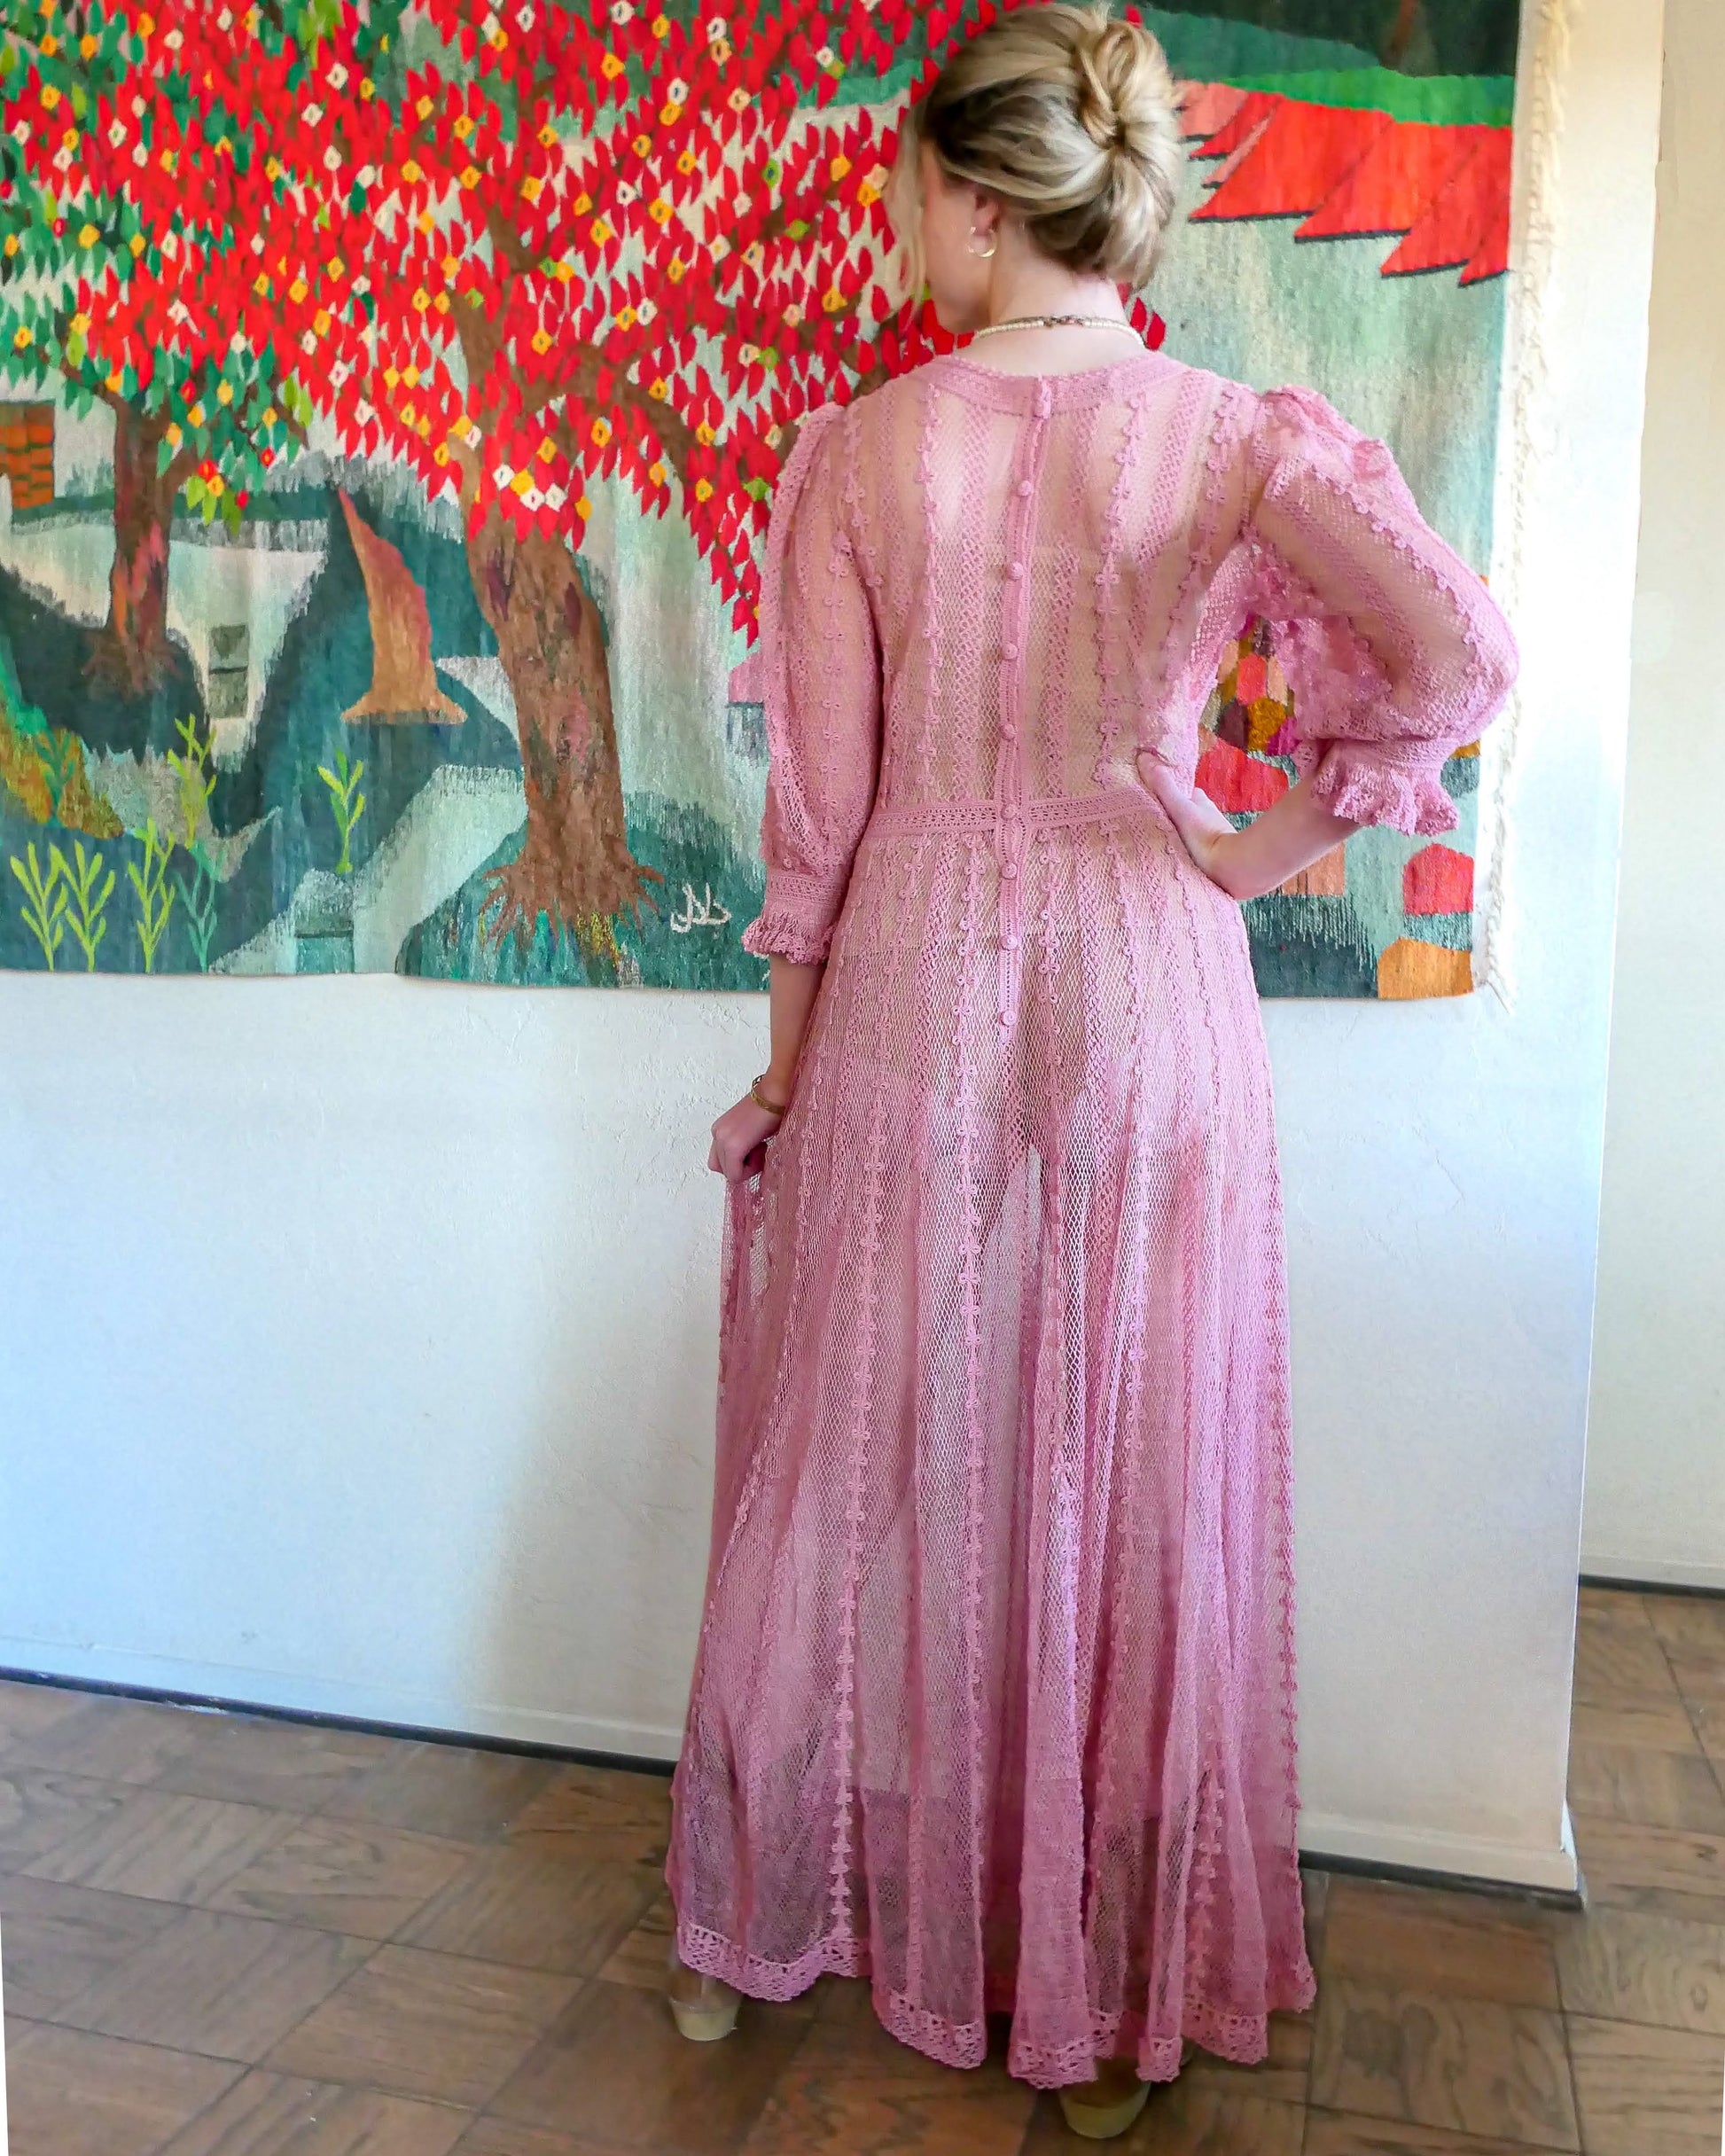 Back view of dress. One of our original Lim's crochet maxi dresses in a muted rose color from the 1980's. A darling of a piece and sure to turn heads, this dress was intricately hand crocheted using very fine cotton threads.   3/4 length sleeves, round collar, with ruffles at the wrist.  Model is wearing a natural colored slip underneath. 